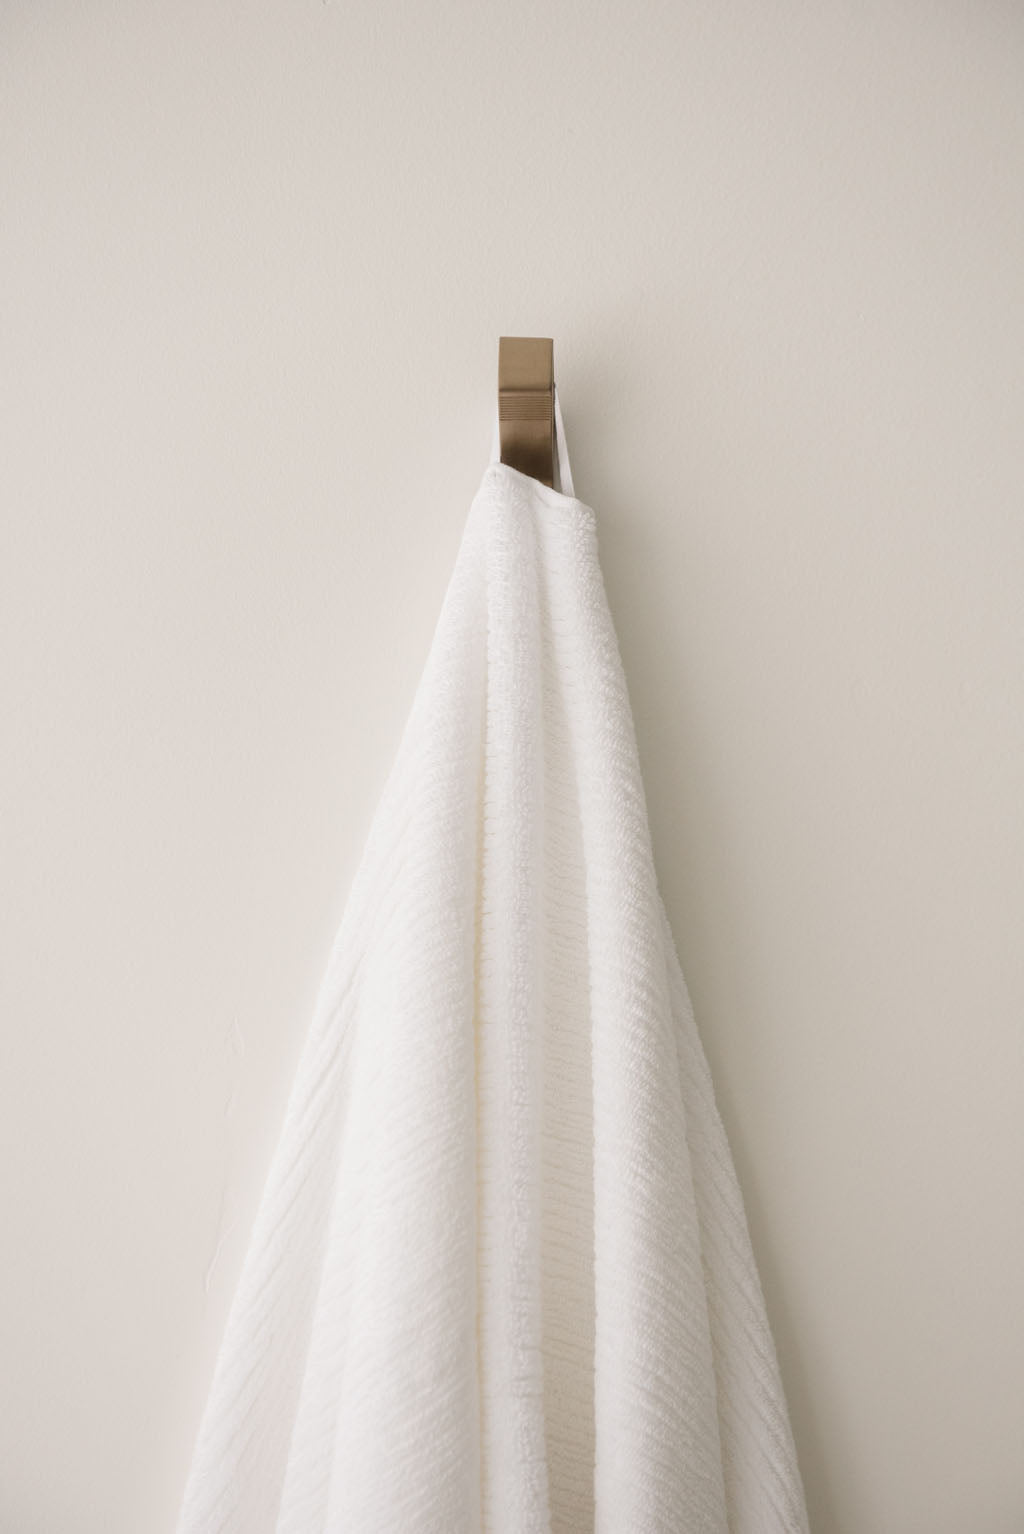 Ribbed Terry Bath Towel in the color White. Photo of Ribbed Terry Bath Towel taken as the White Ribbed Terry Bath Towel is hanging from a towel hook in a bathroom. 